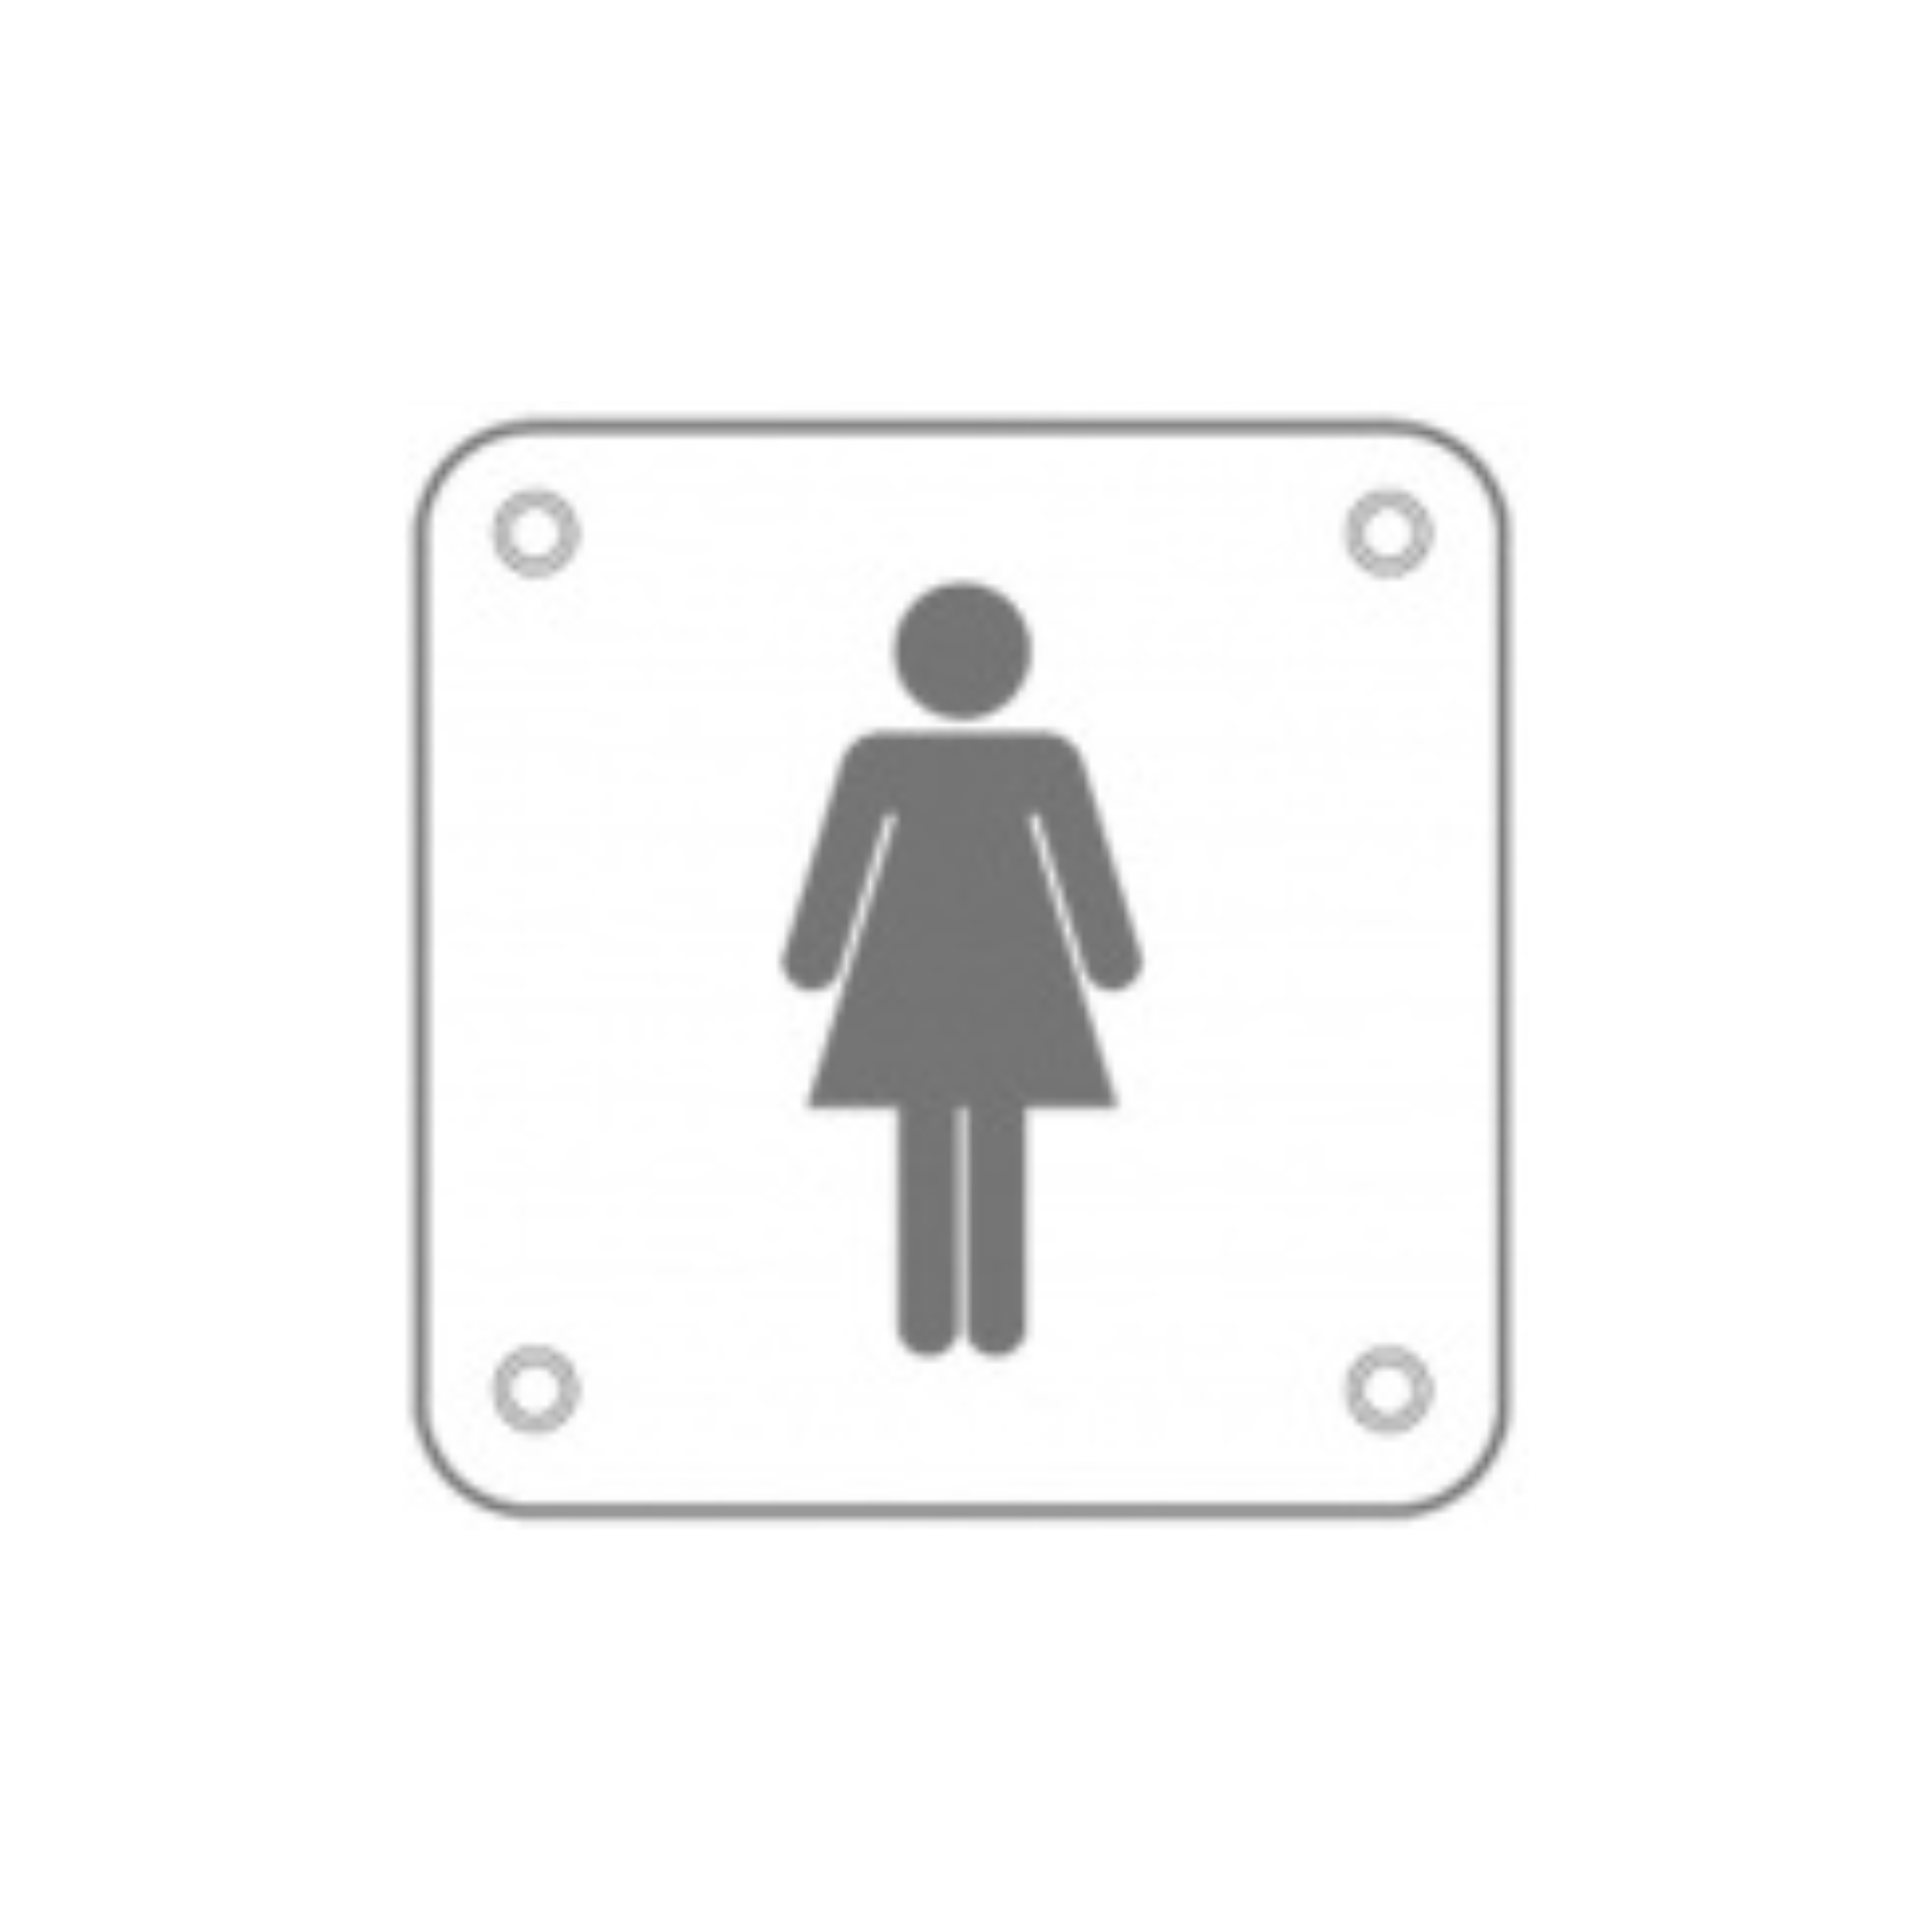 Female, Square Engraved Sign, 100mm x 100mm, Stainless Steel, QS